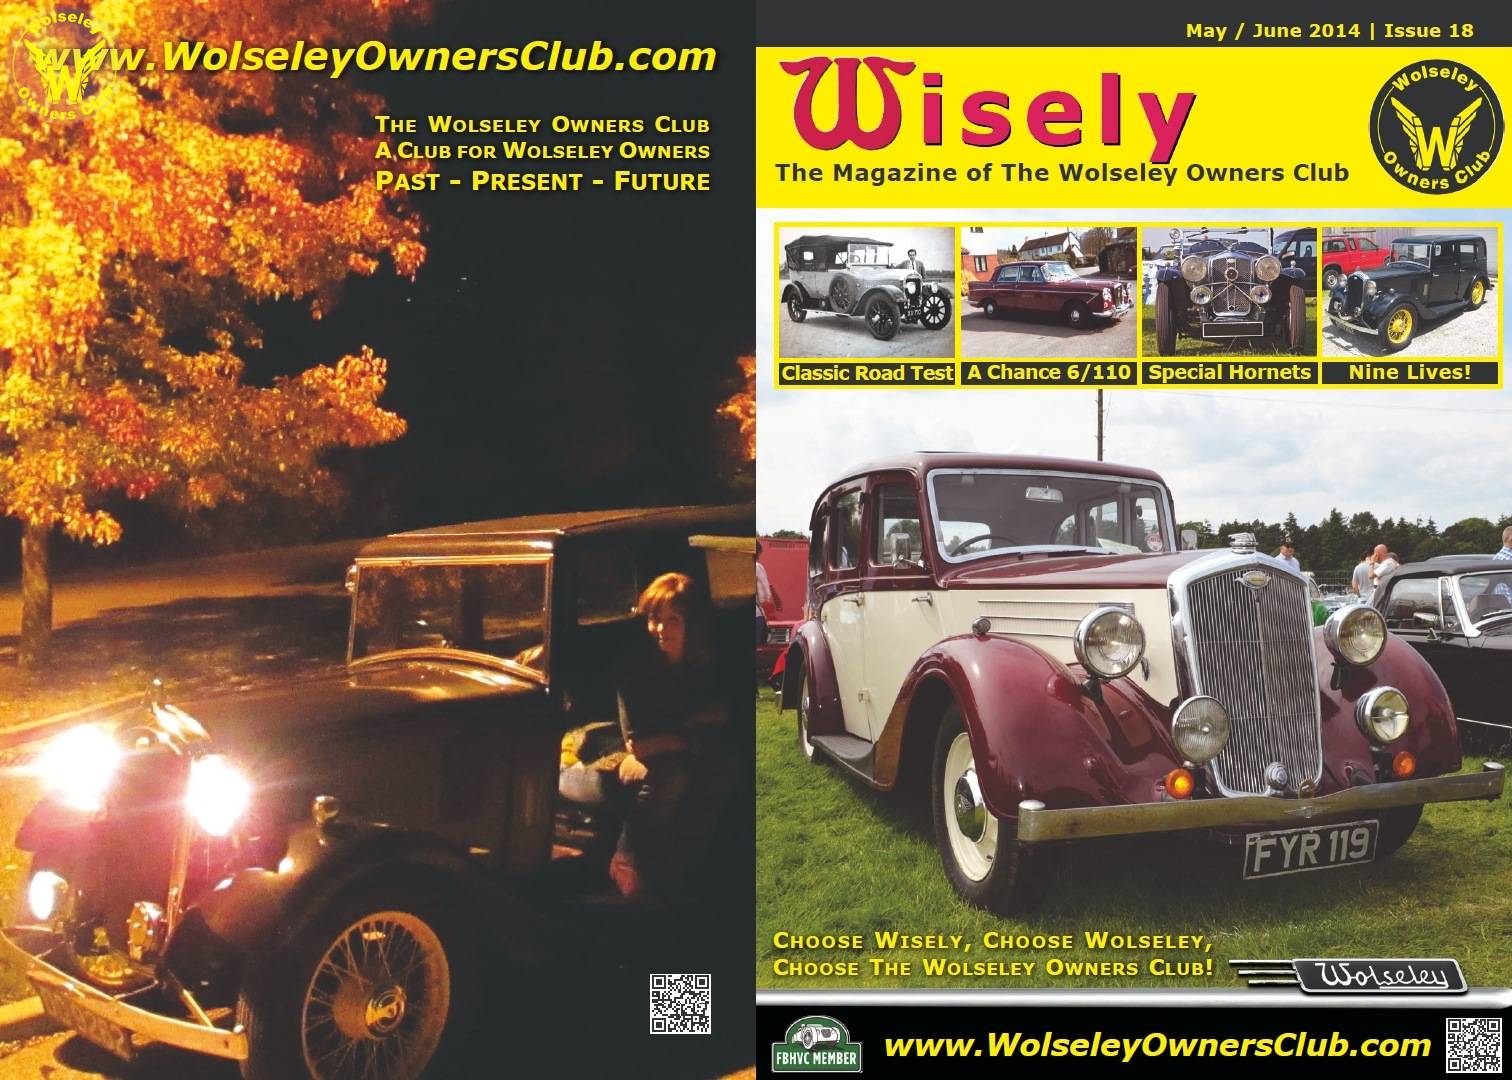 Wisely Issue 18